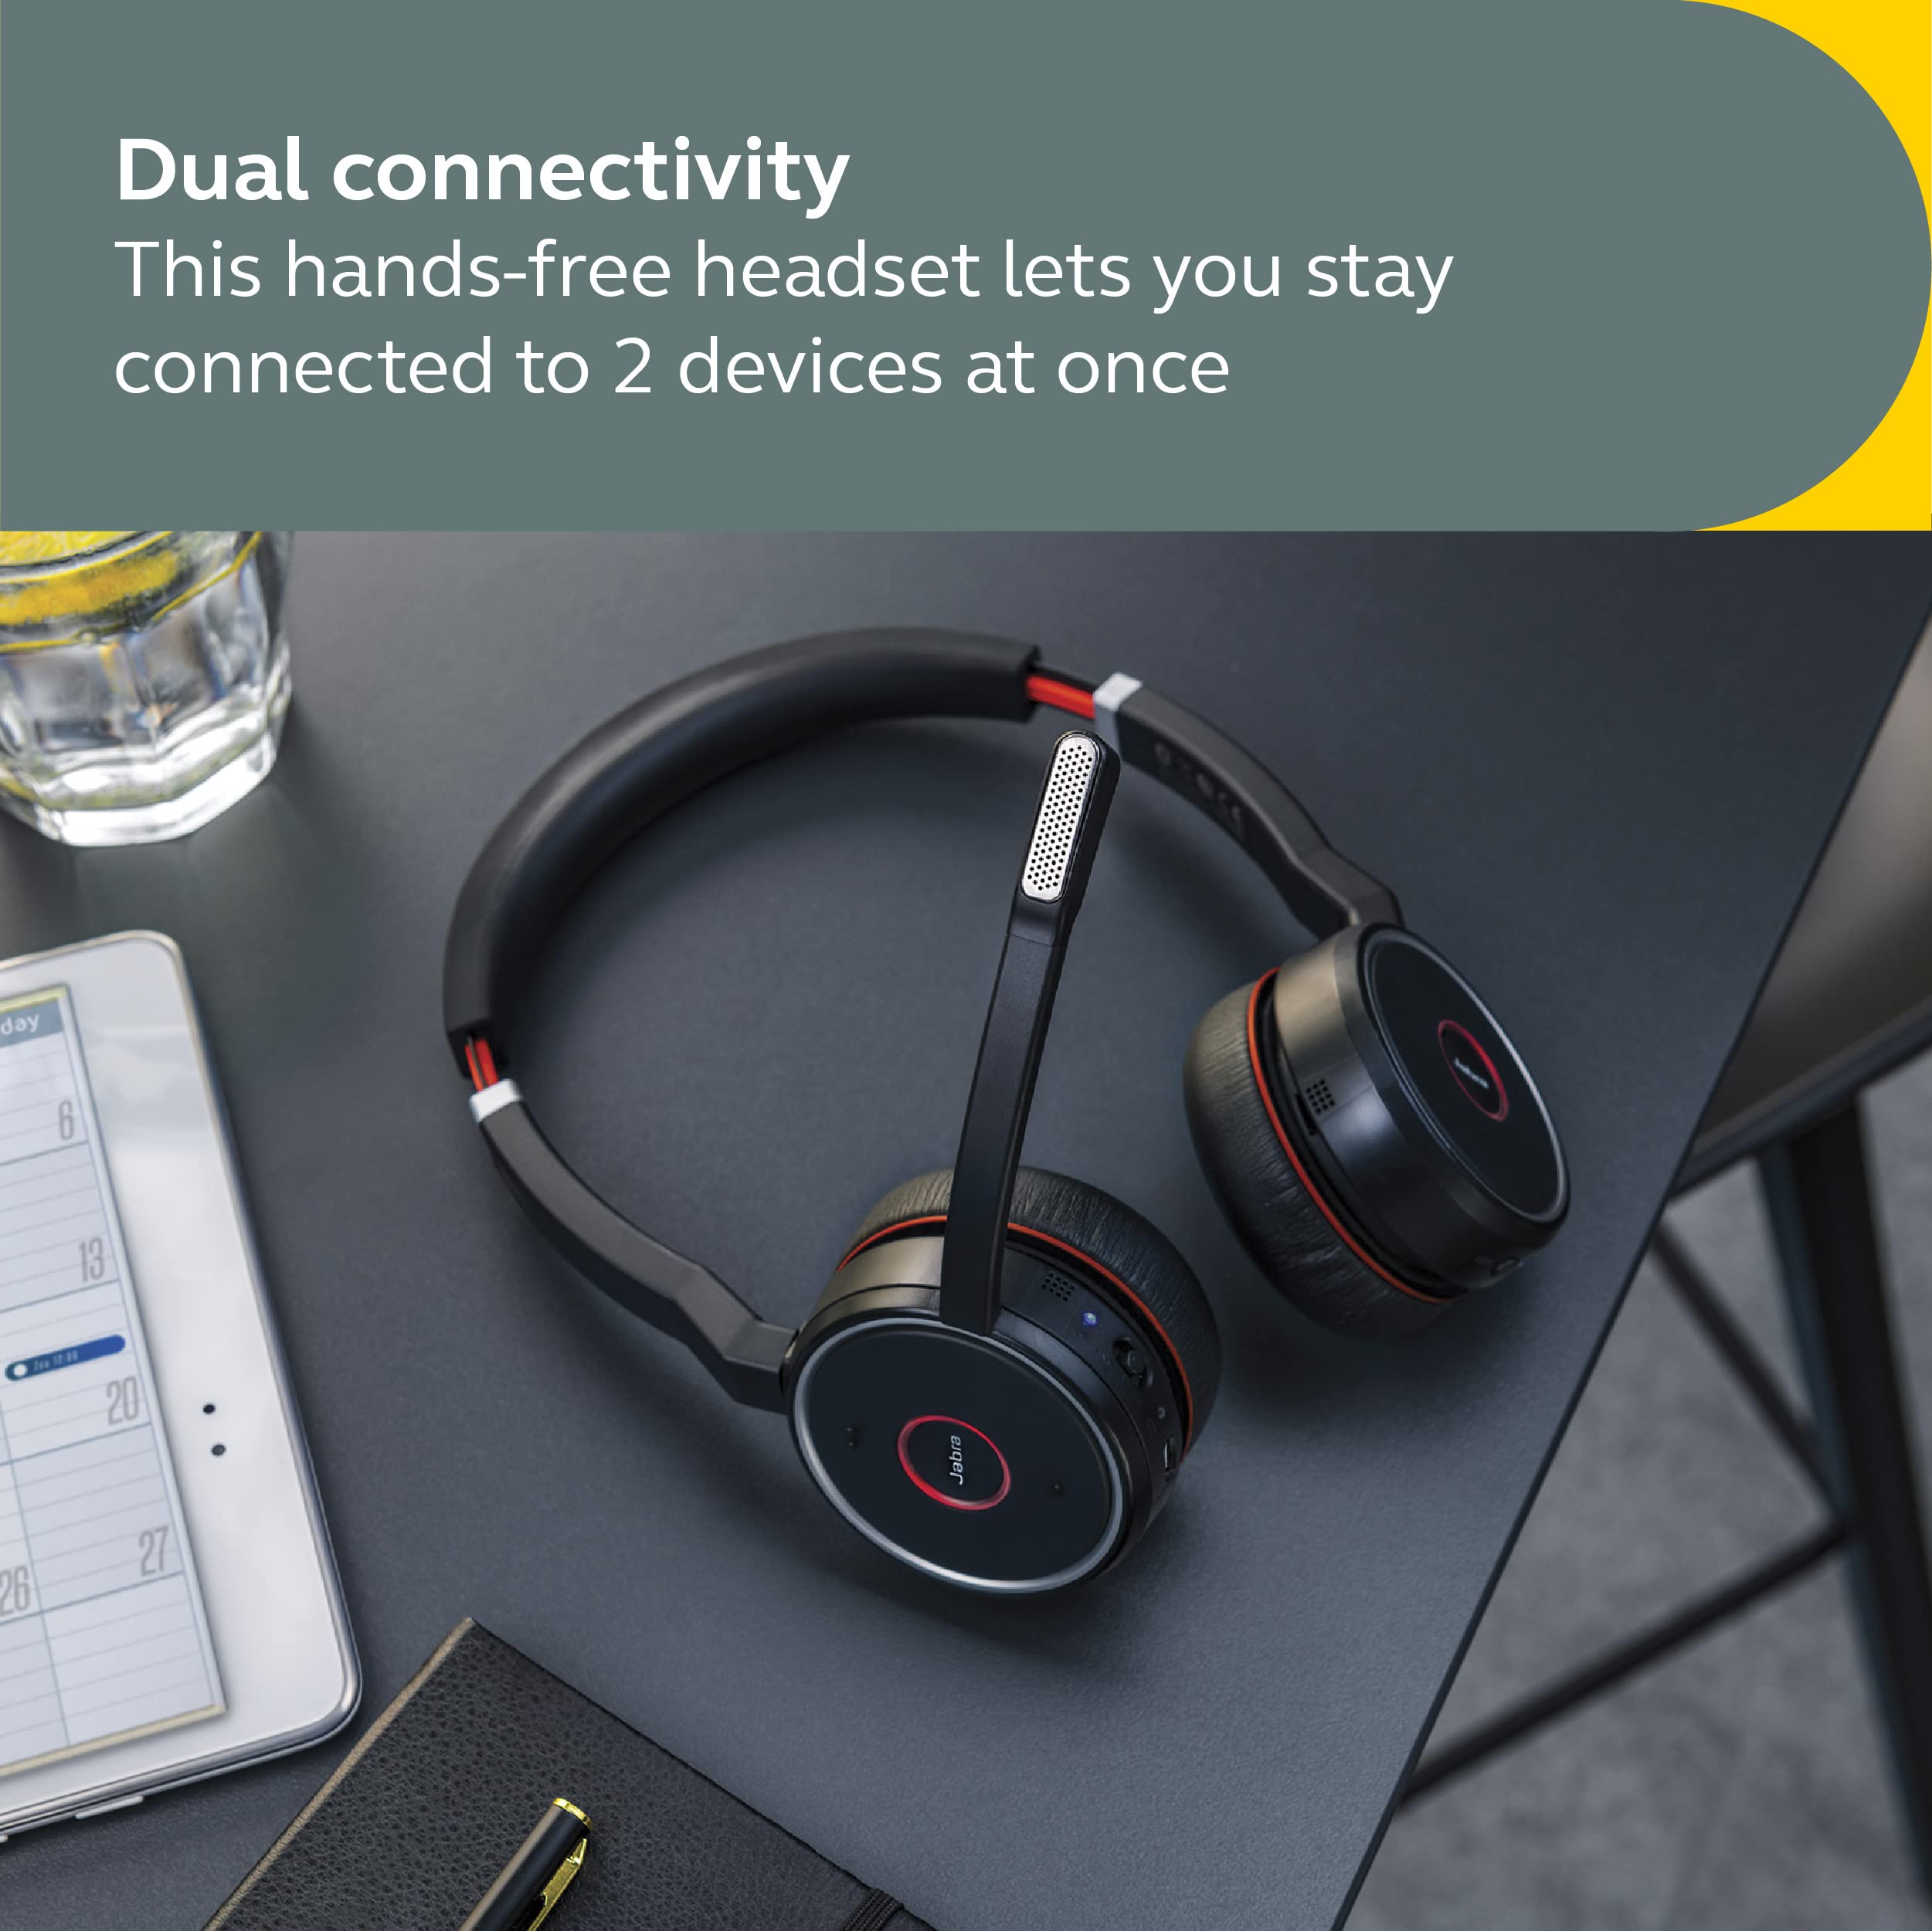 Jabra Evolve 75 SE, Link380a UC Stereo- Bluetooth Headset with Noise-Cancelling Microphone, Long-Lasting Battery and Dual Connectivity - Works with All Other Platforms - Black